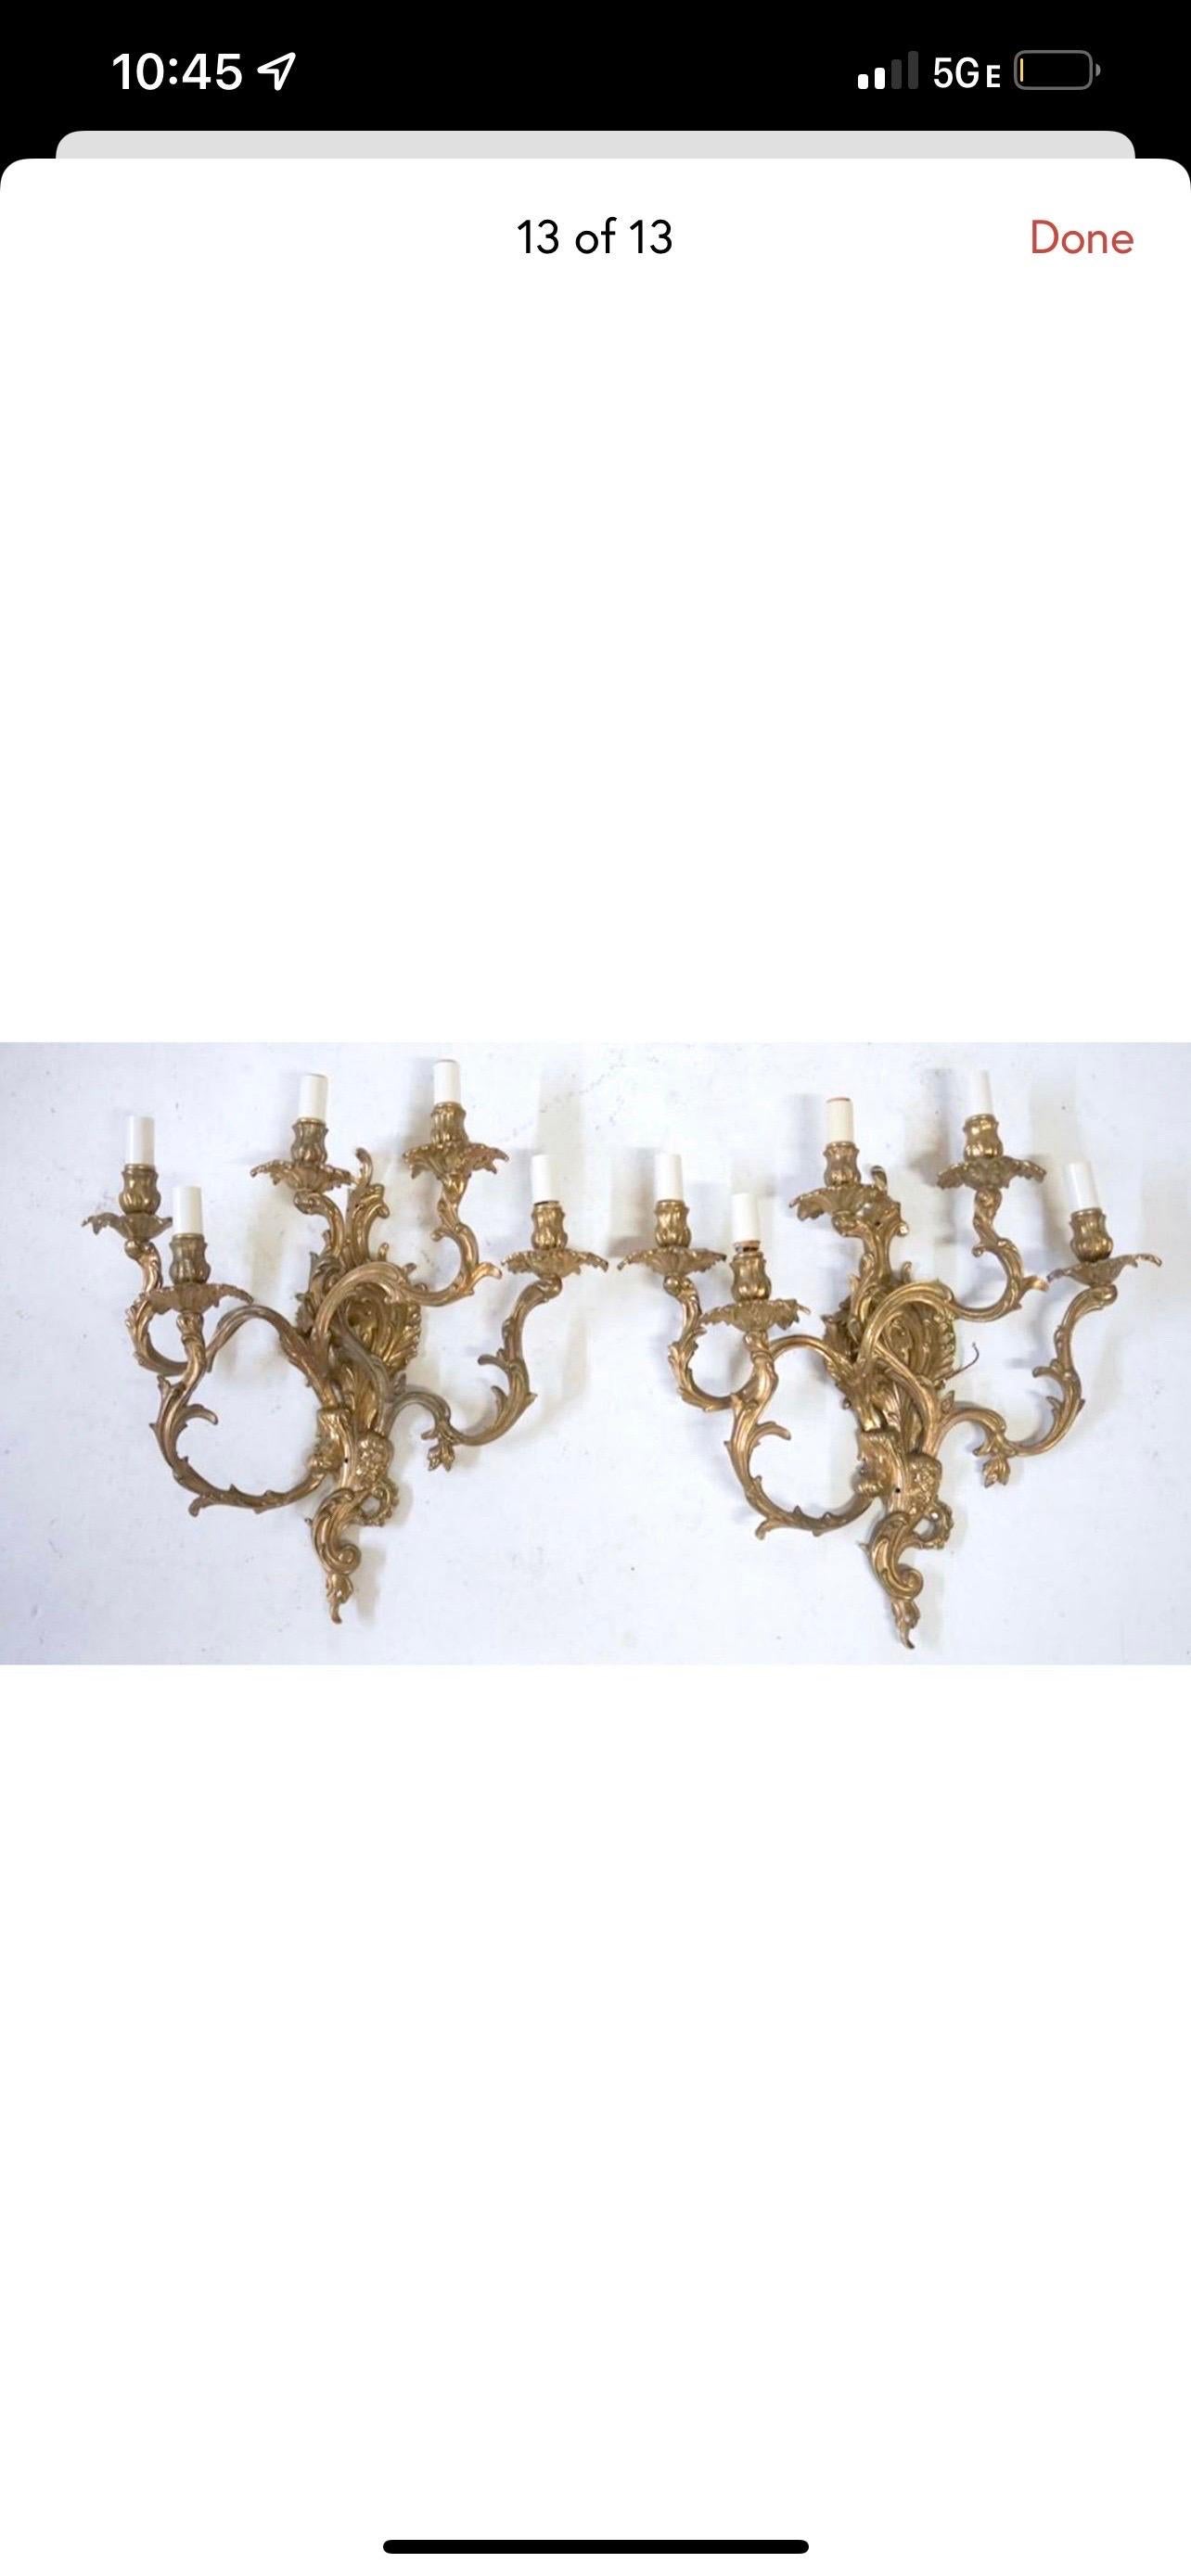 These stunning caste brass 5 arm wall sconces have been converted to be hard wired. They are just absolutely stunning. I always recommend getting any vintage lighting rewired but they were in working condition when removed from the house. I